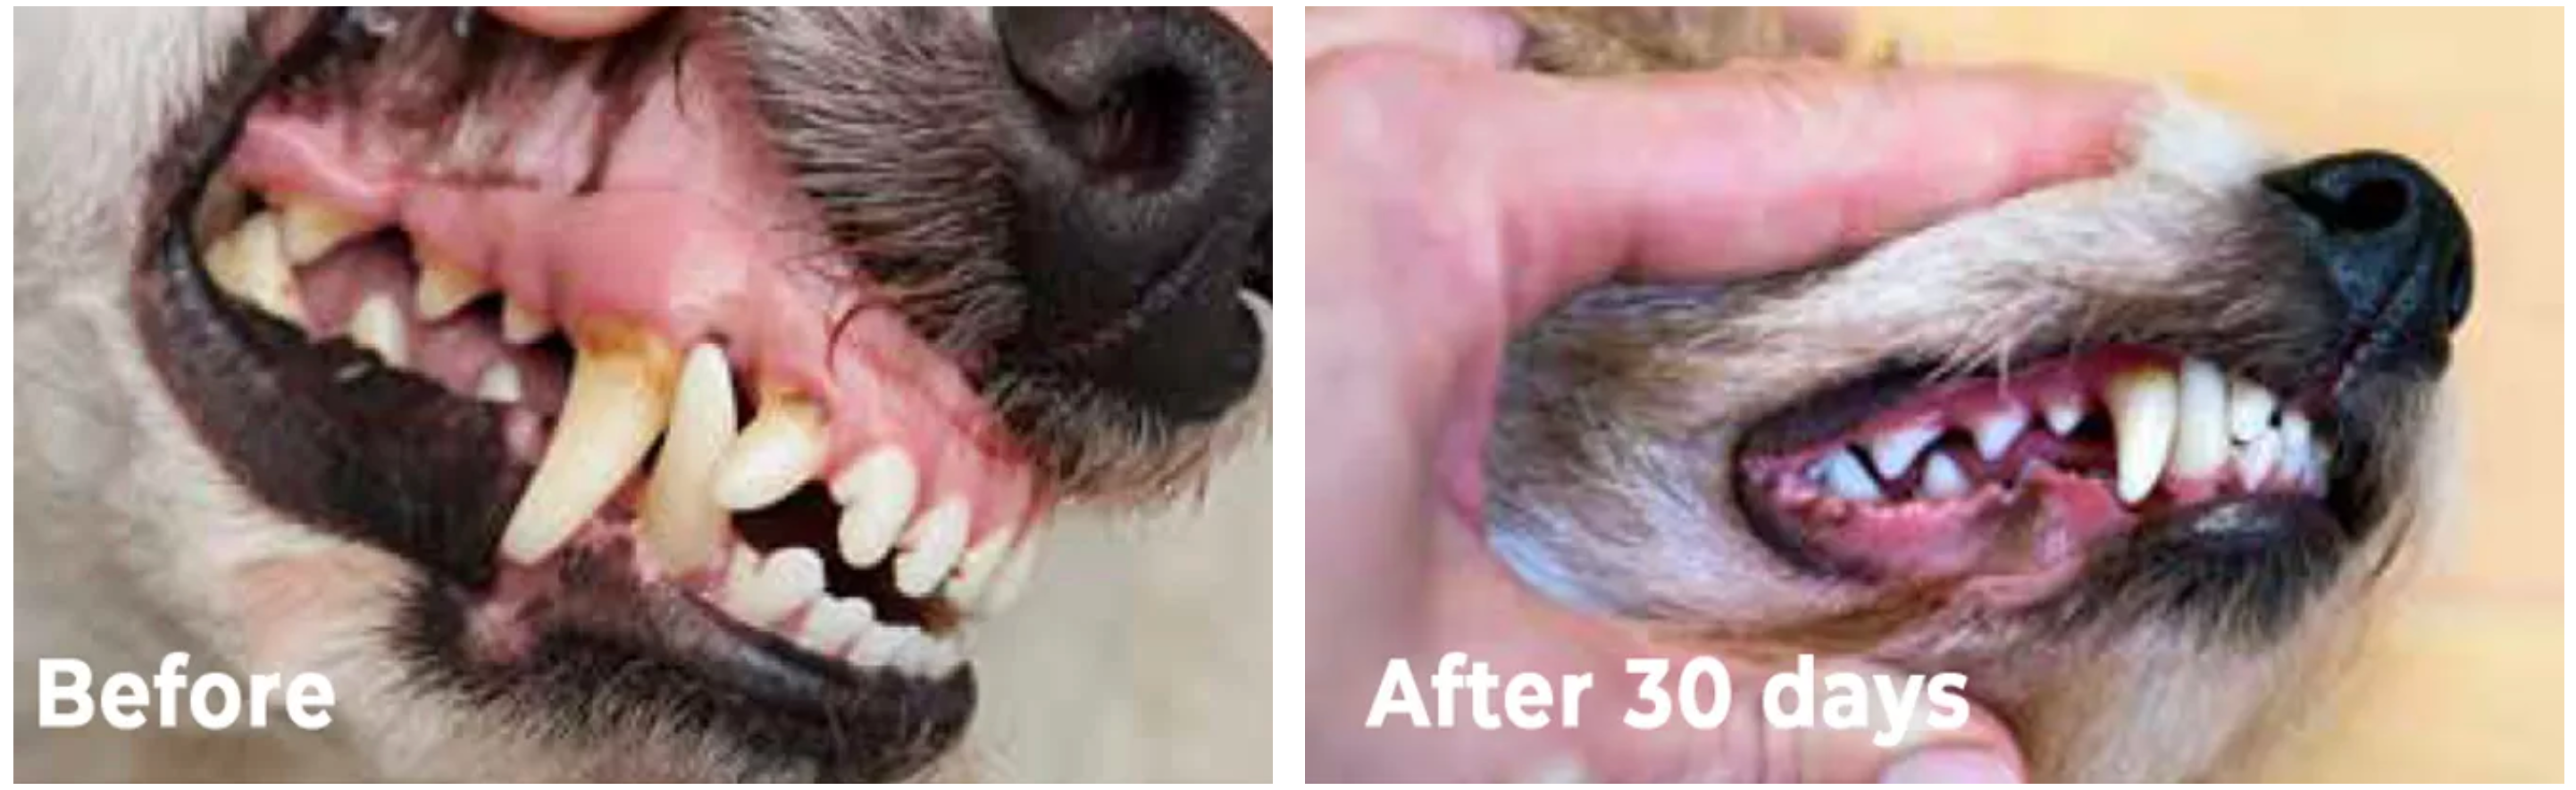 ioVet Before After Dog Gums and Teeth